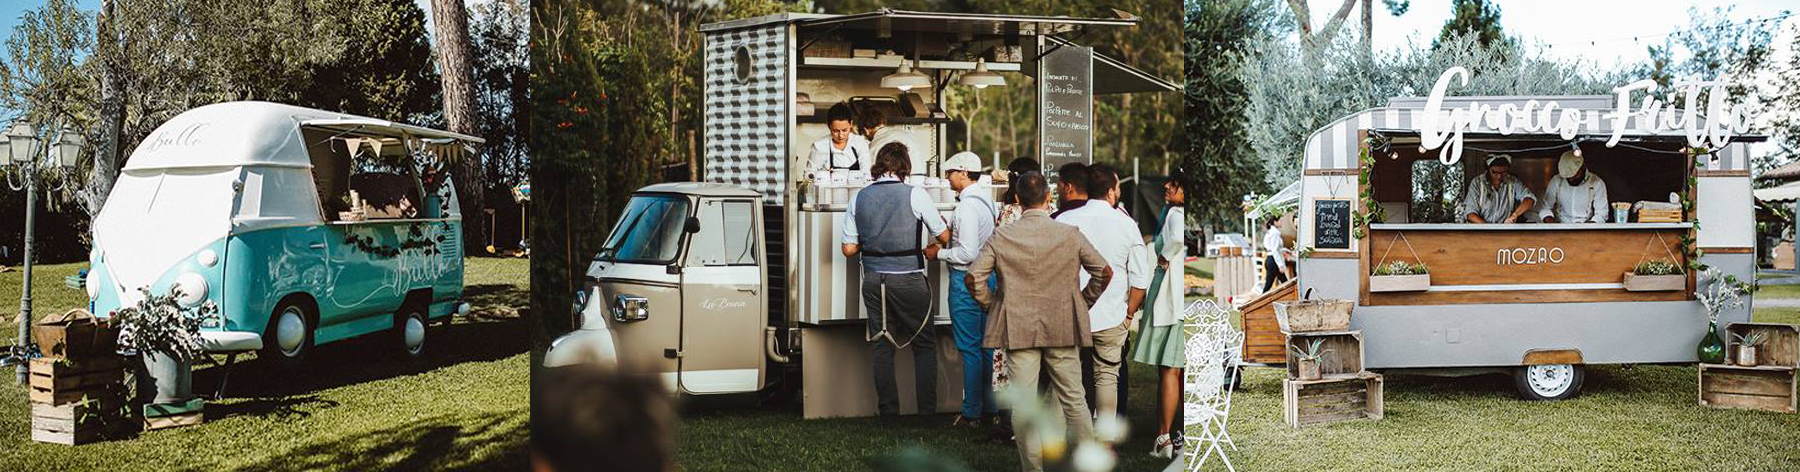 Catering street food con food truck